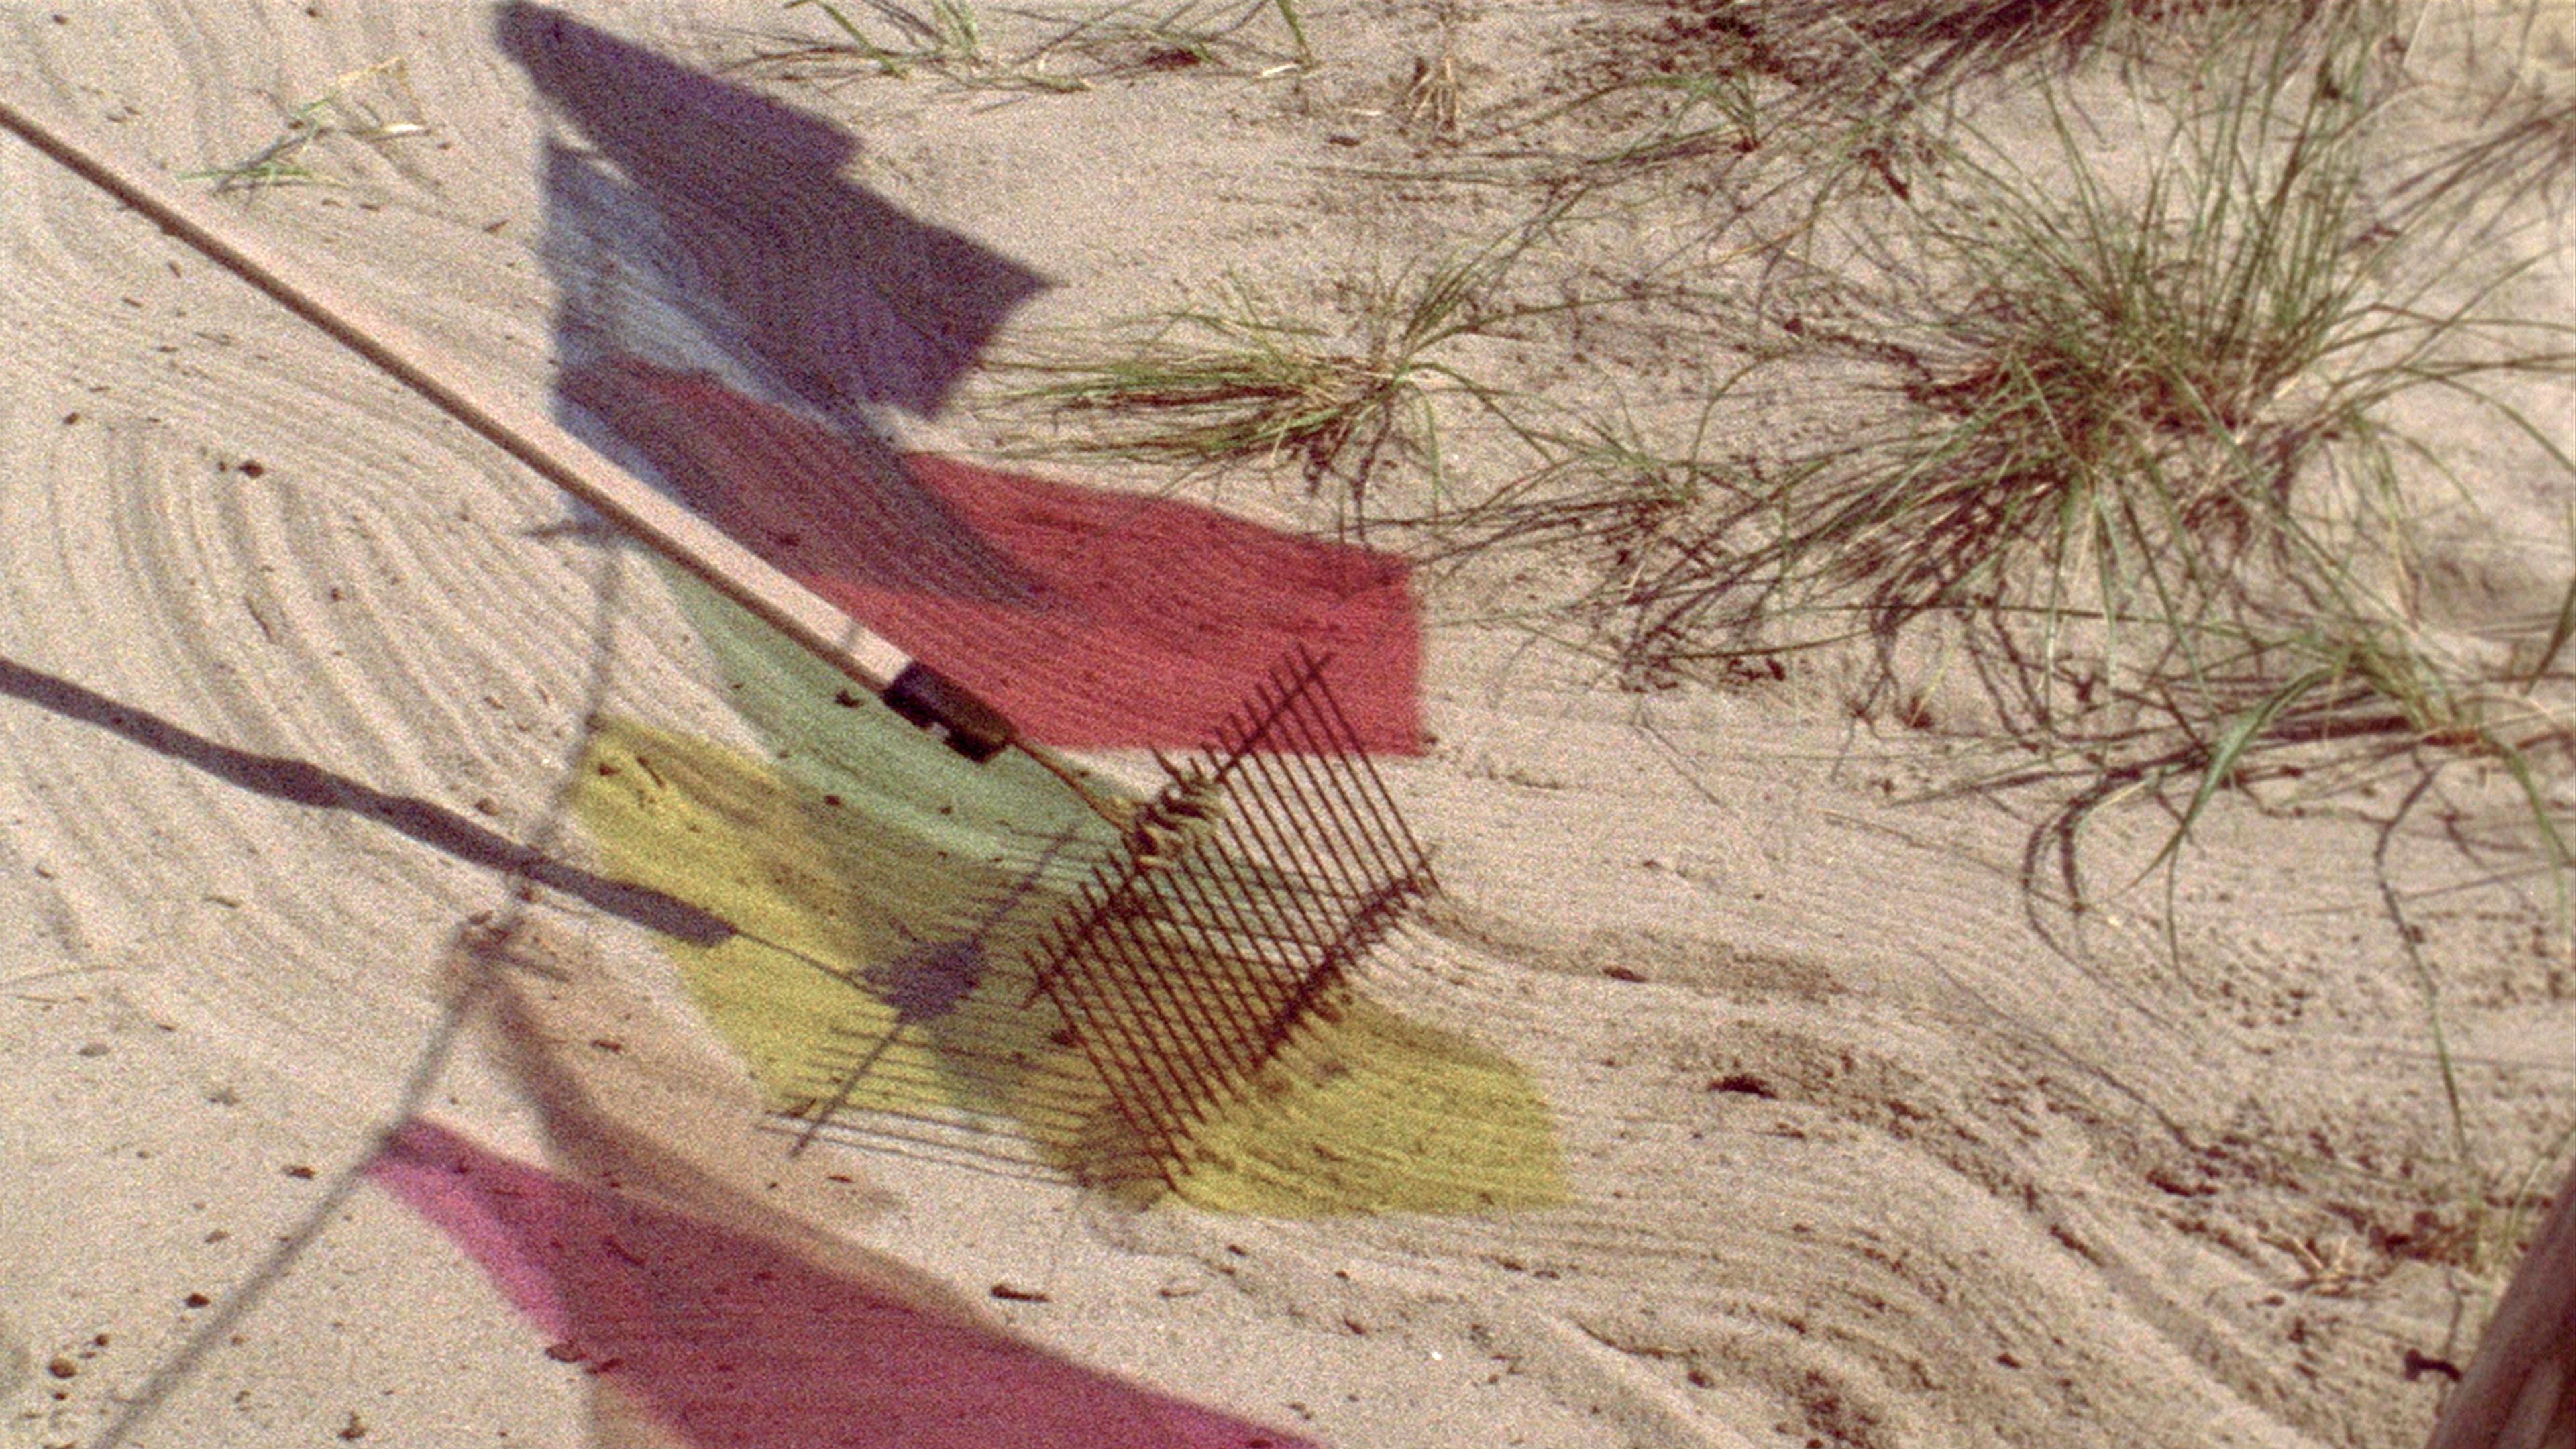 A rake with a wooden handle rakes through sand dunes, its trail mixing with shadows from a line of multicoloured flags.